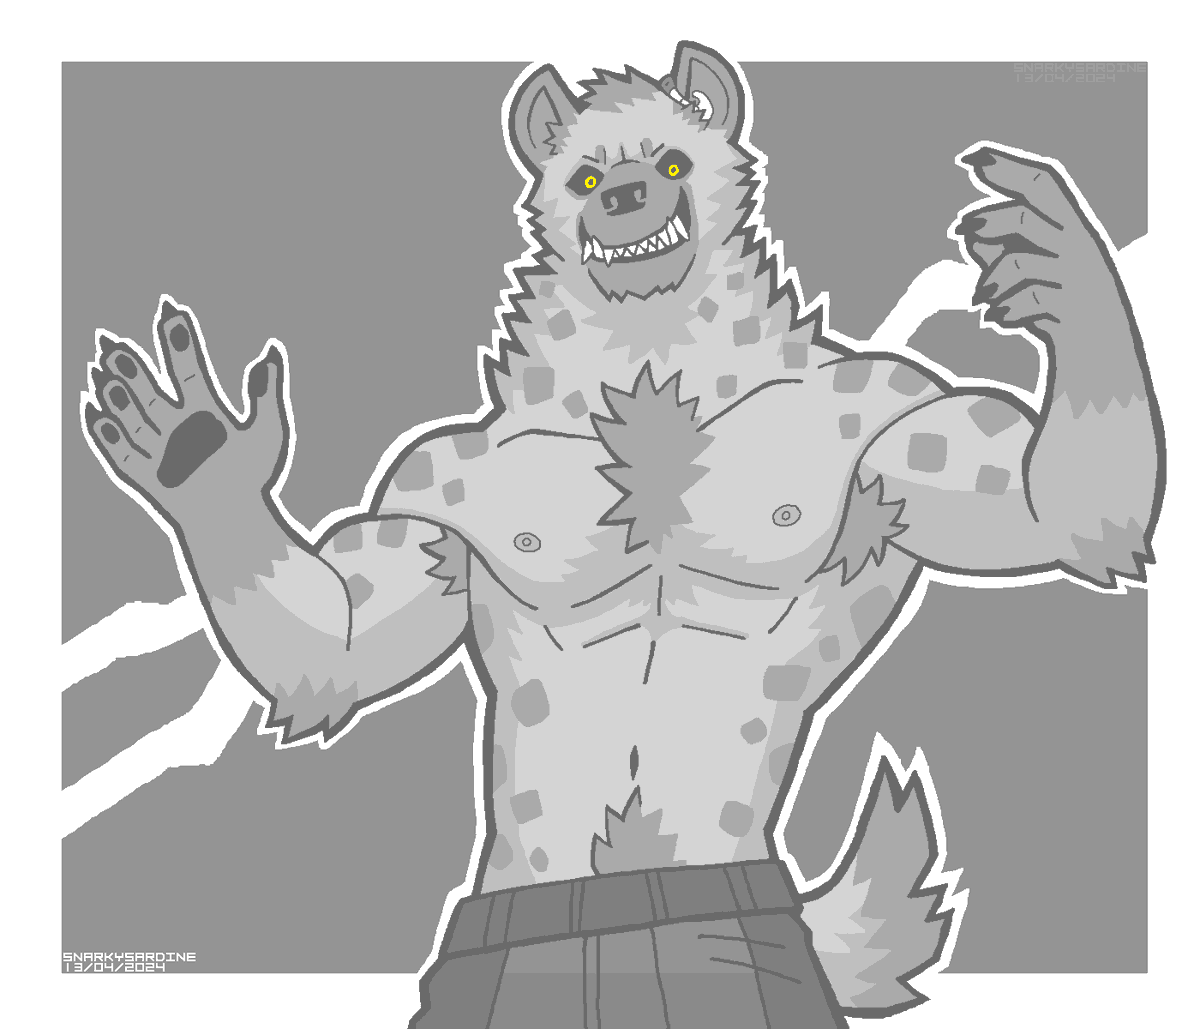 yeen sketch which i ended up spending too much time on